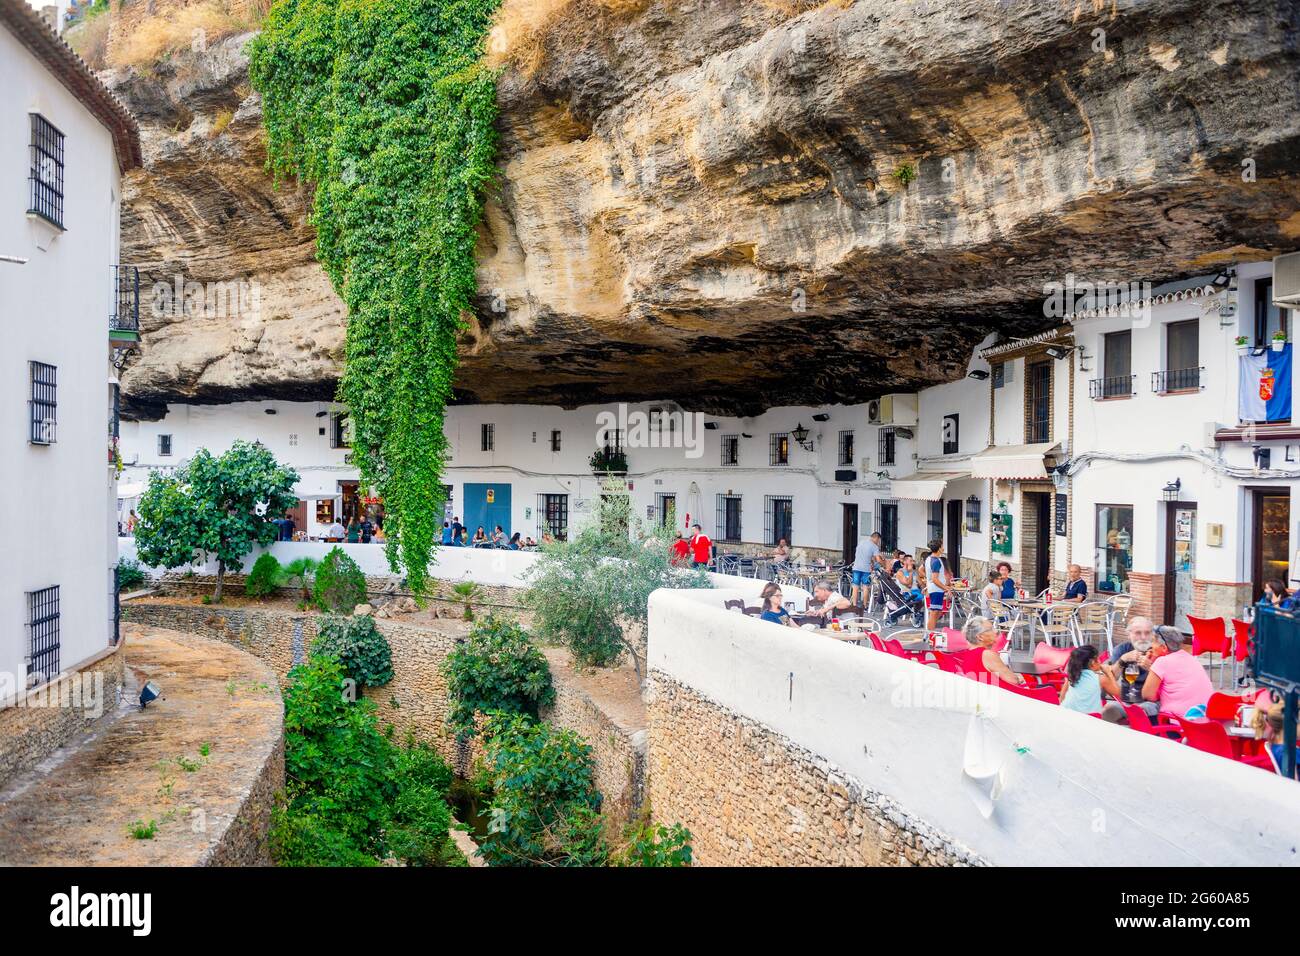 White washed houses built under the rock in Setenil de las Bodegas, Andalucia, Spain Stock Photo